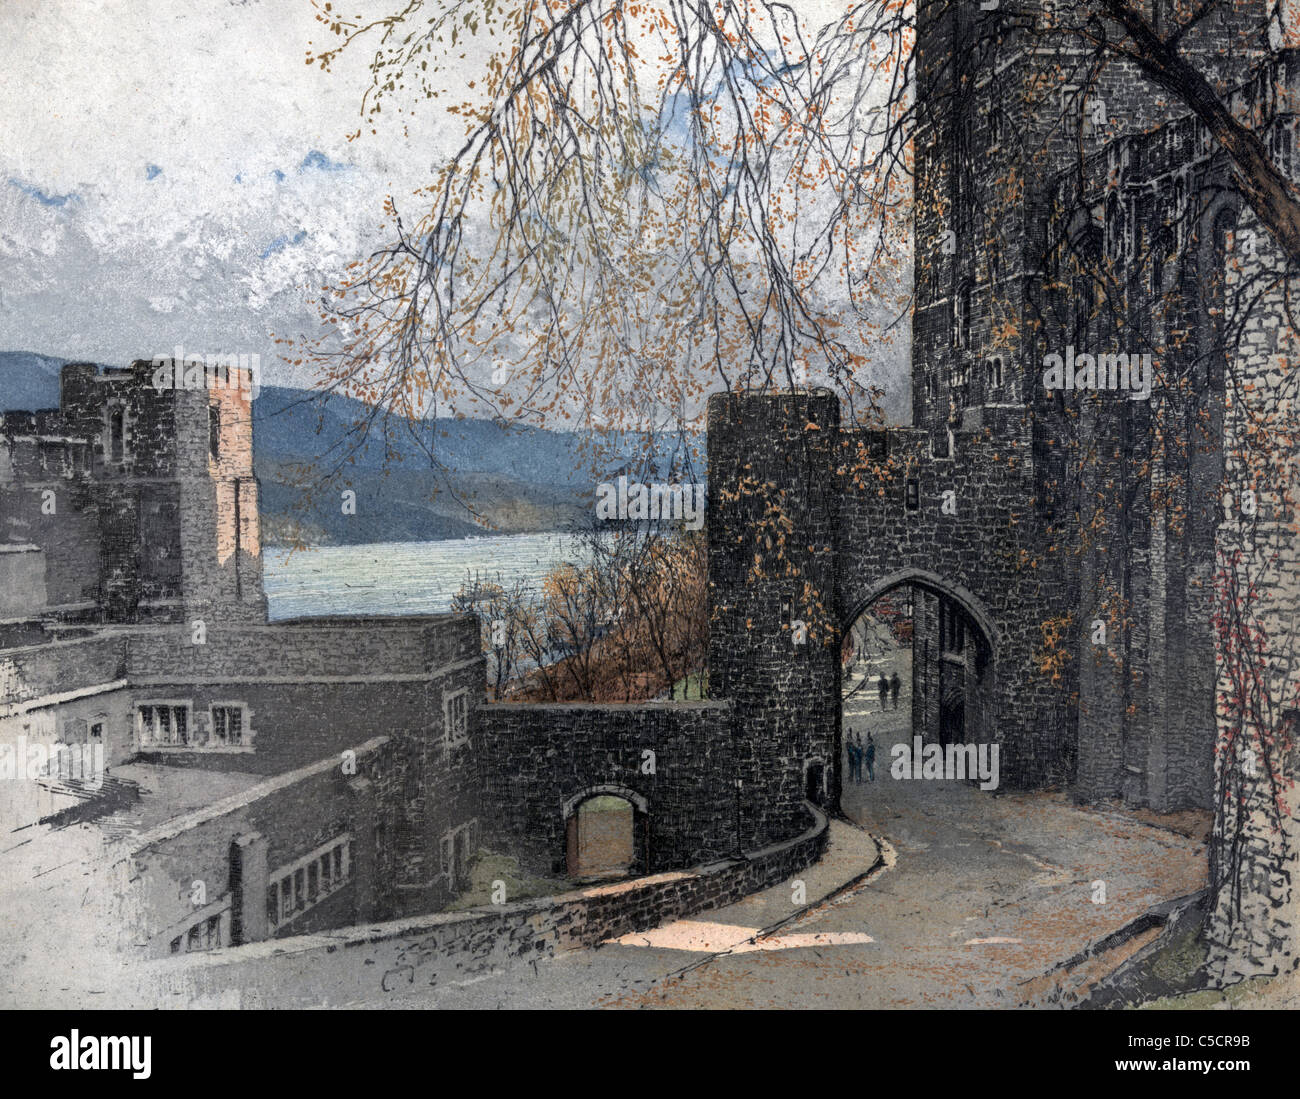 Militare di West Point Academy Foto Stock